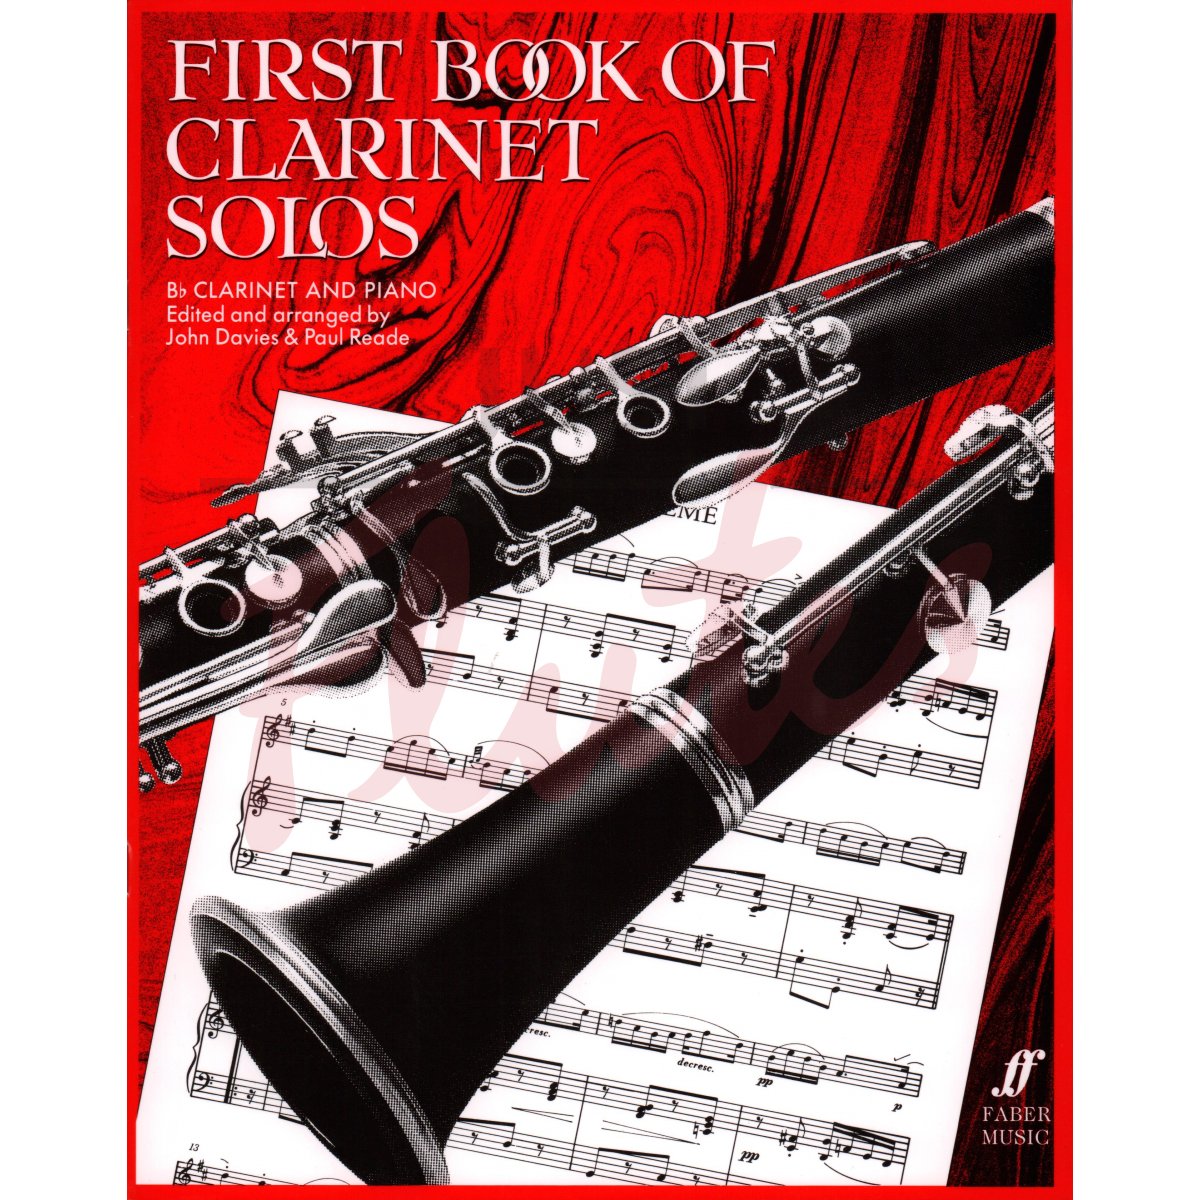 First Book of Clarinet Solos with Piano Accompaniment